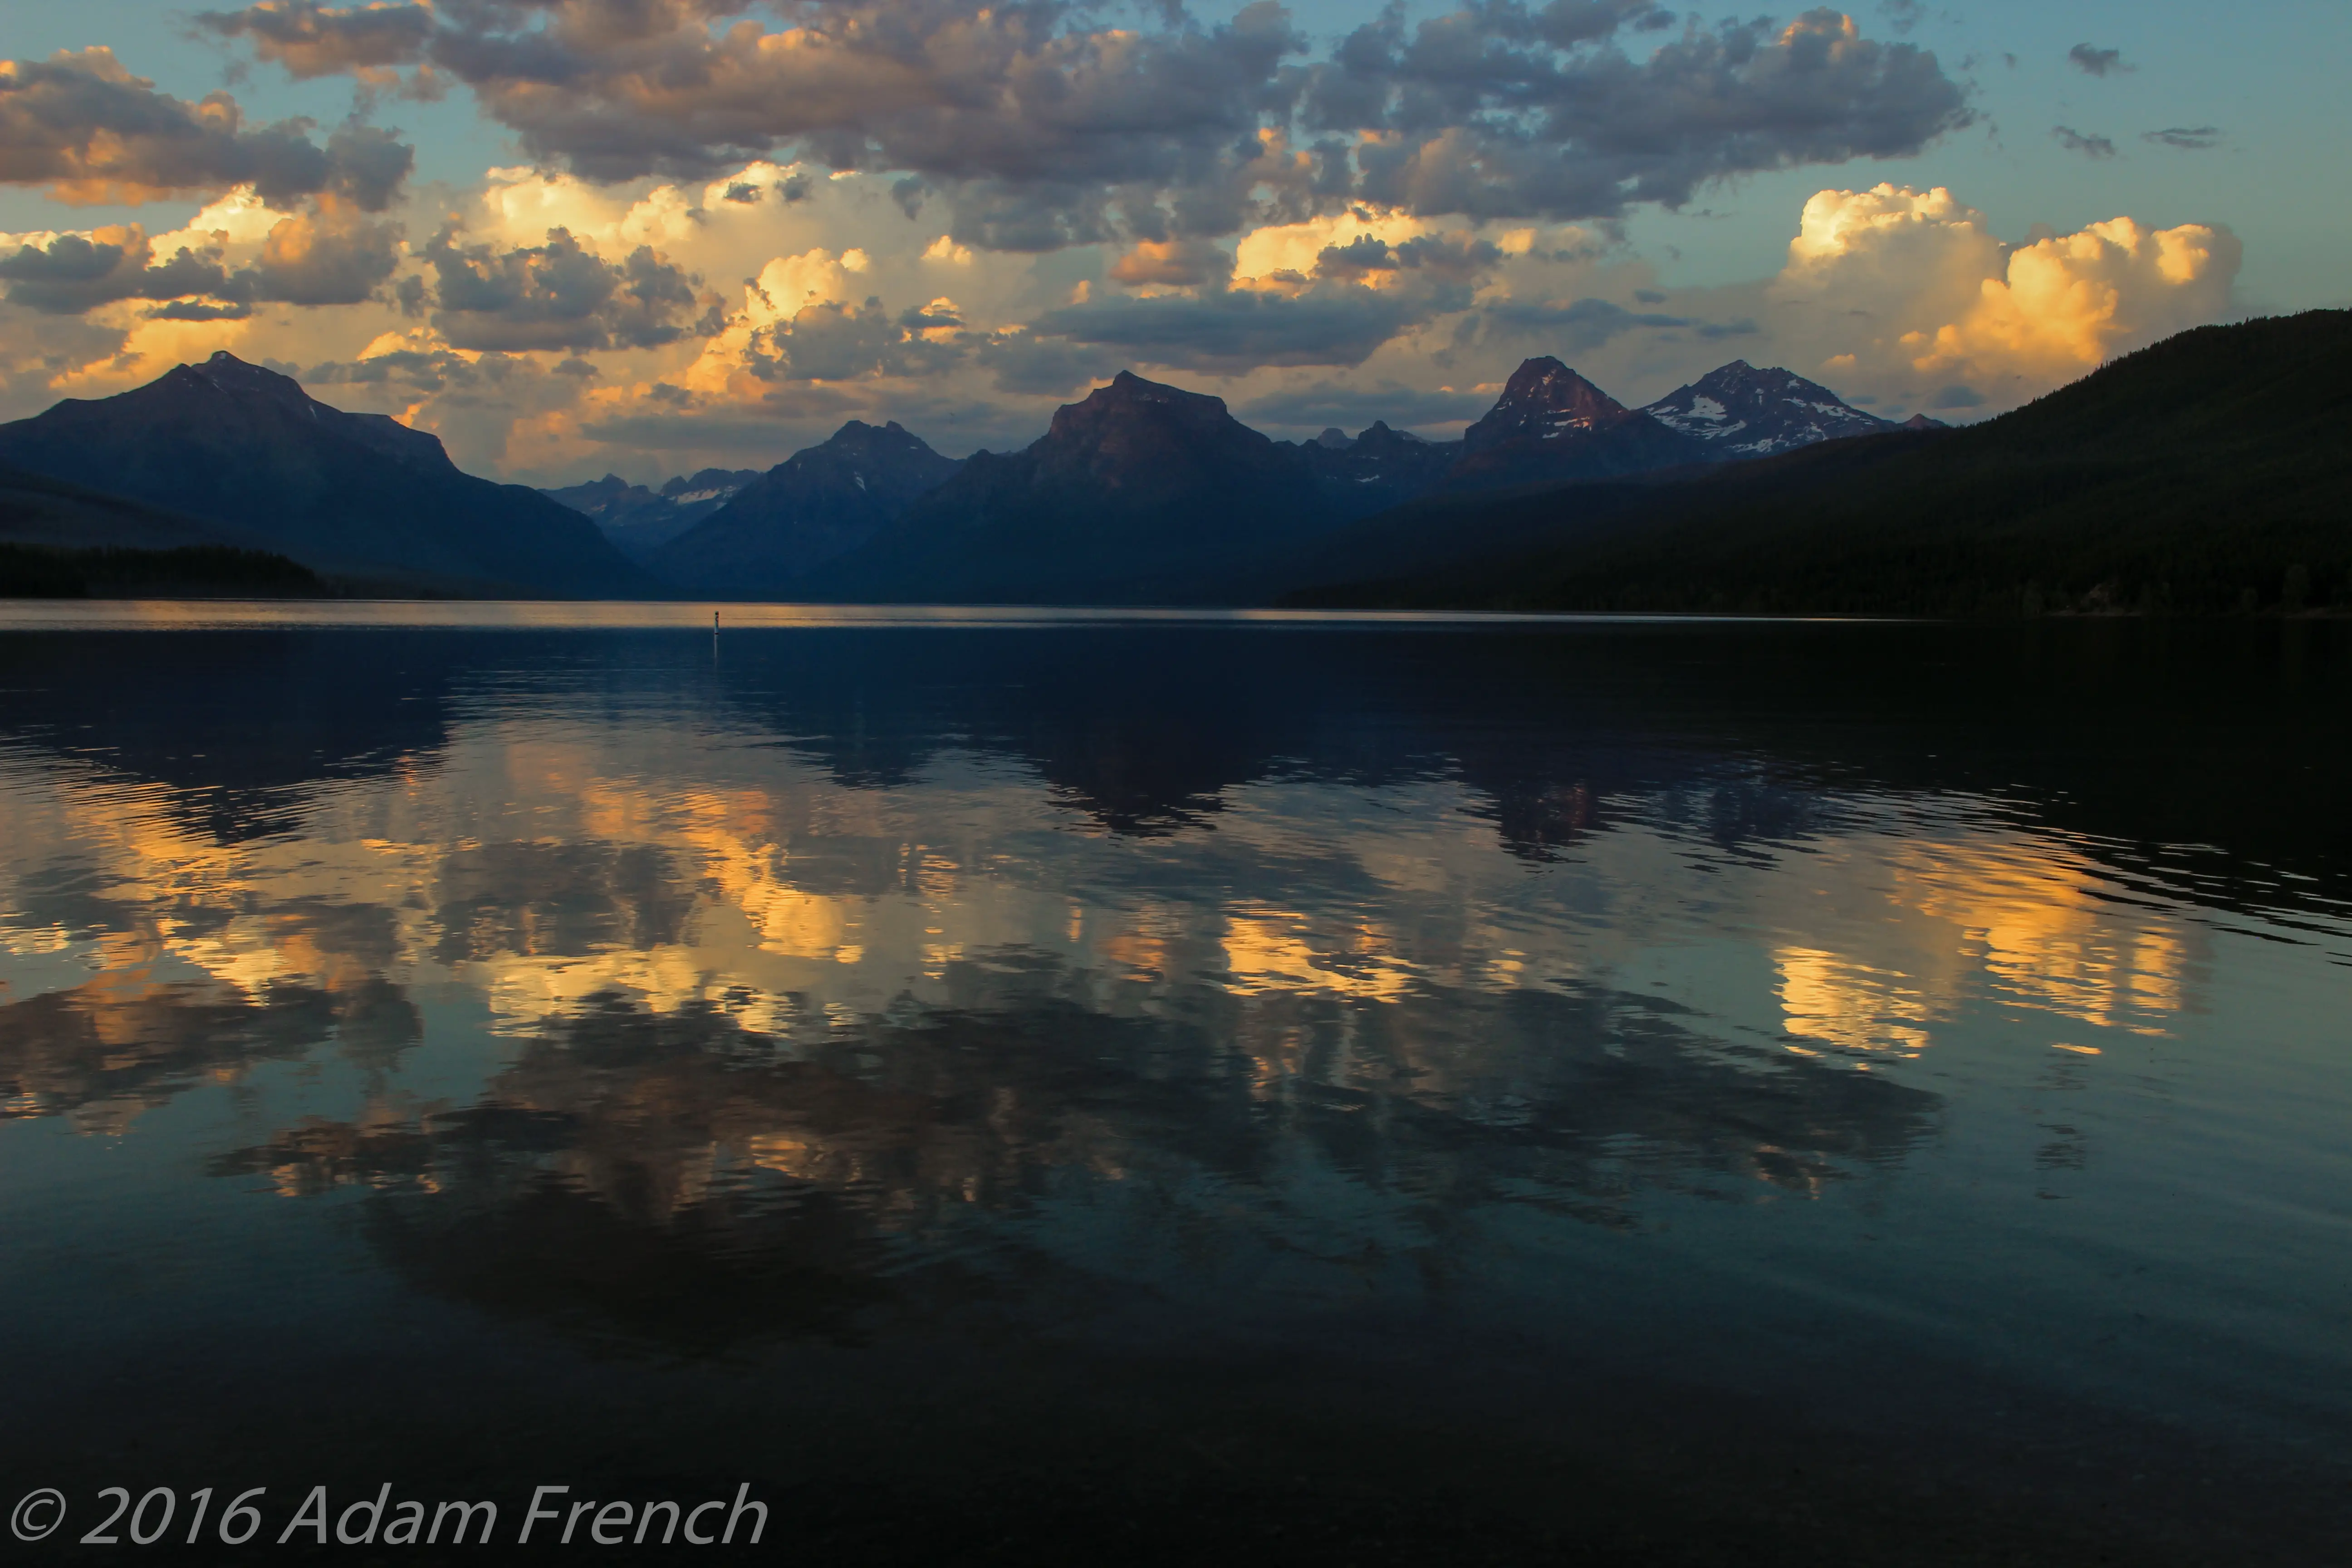 Sunset photo of a flat-water lake with the dark silhouettes of the surrounding mountains and sunset colors in the clouds reflecting in the water